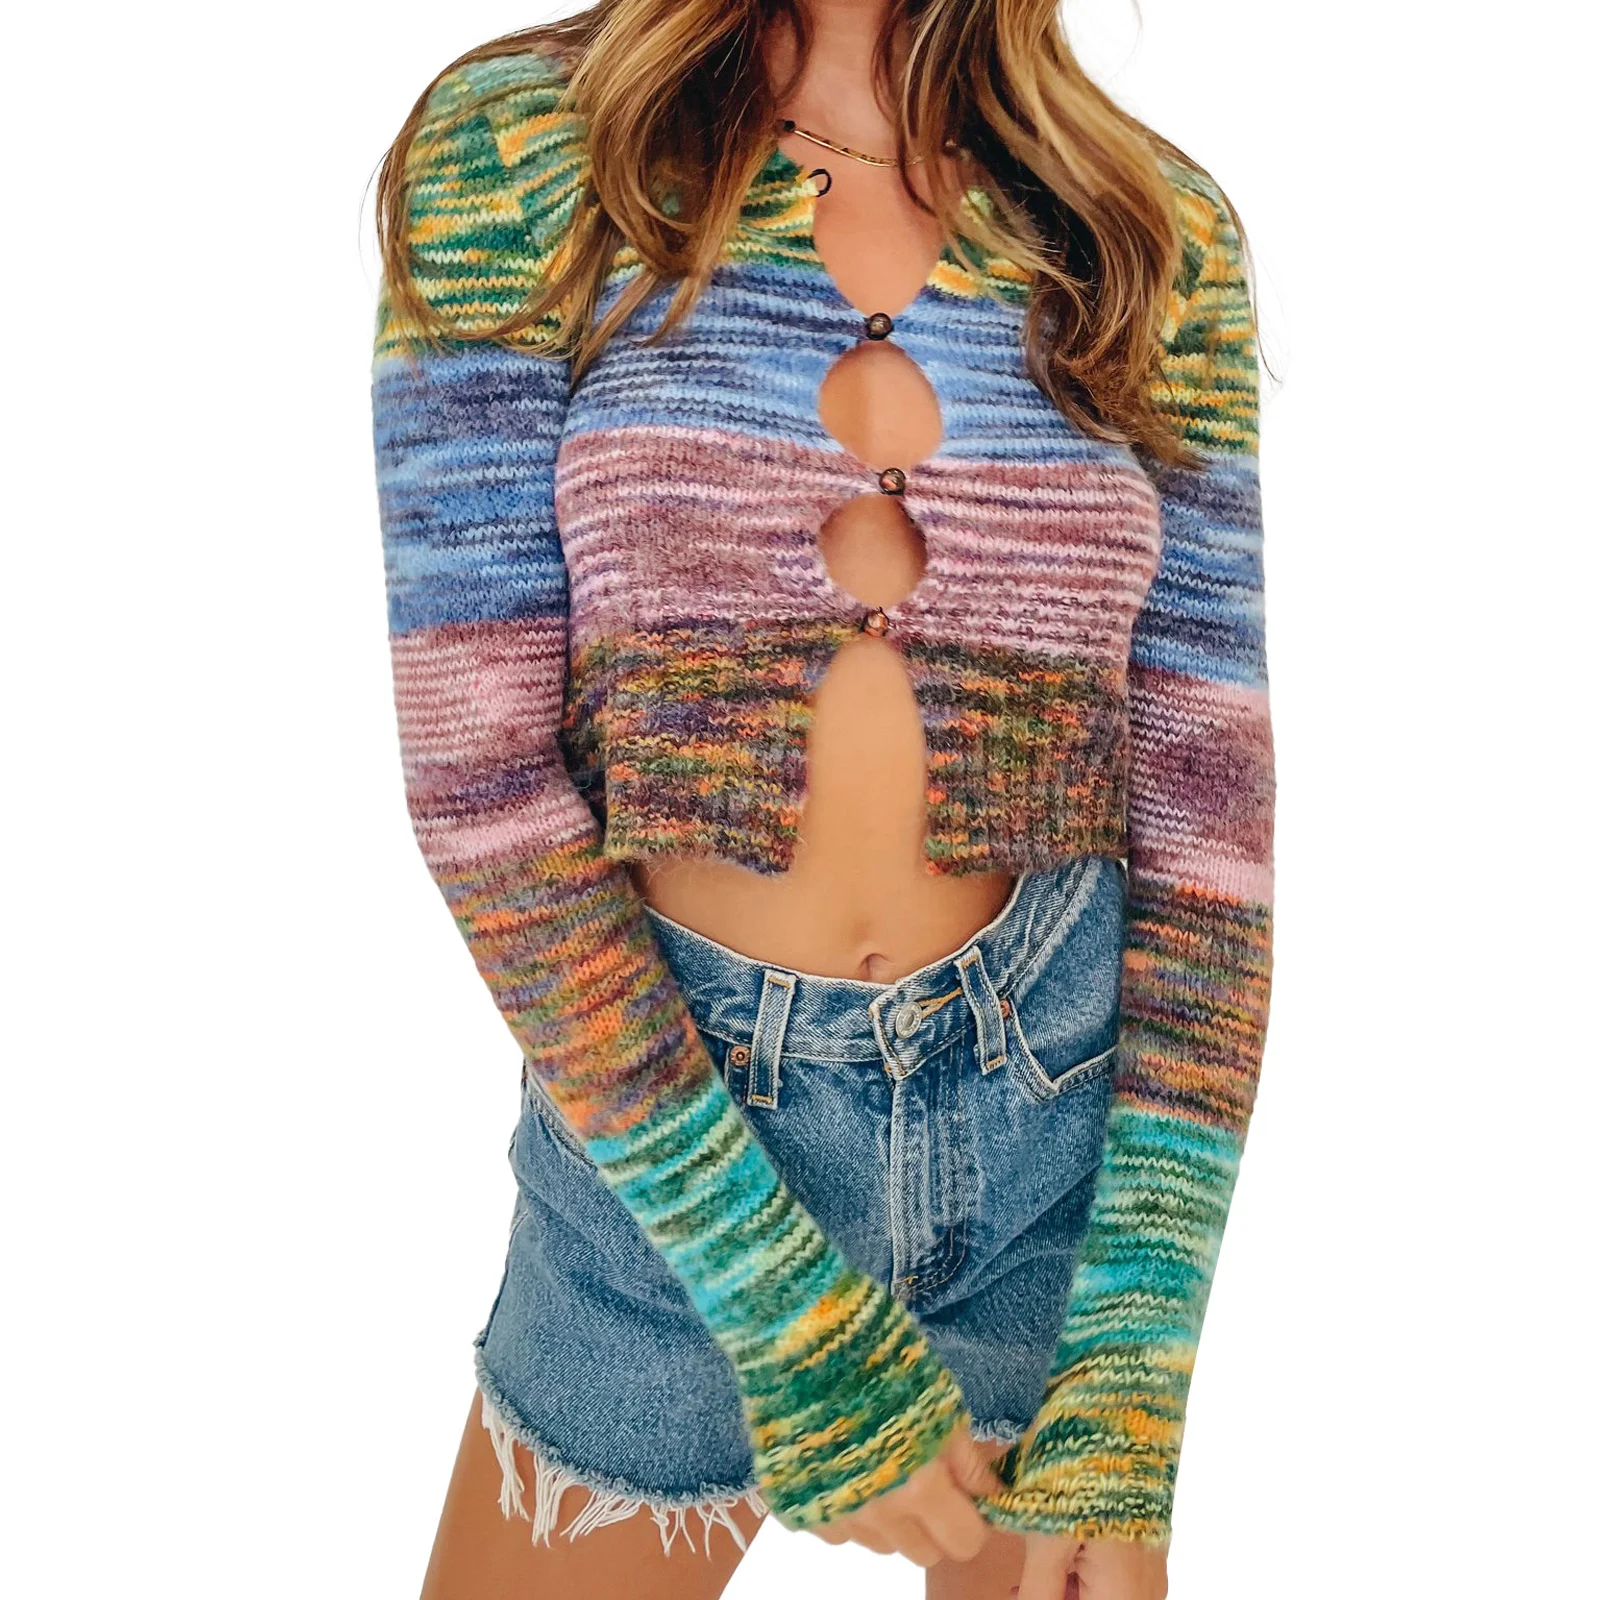 

Women Slim Short Sweater Cardigans Long Sleeve Knitted Tie-Dye Buttons Hollow Lapel Crop Shirts Ladies Spring/Fall Cropped Tops